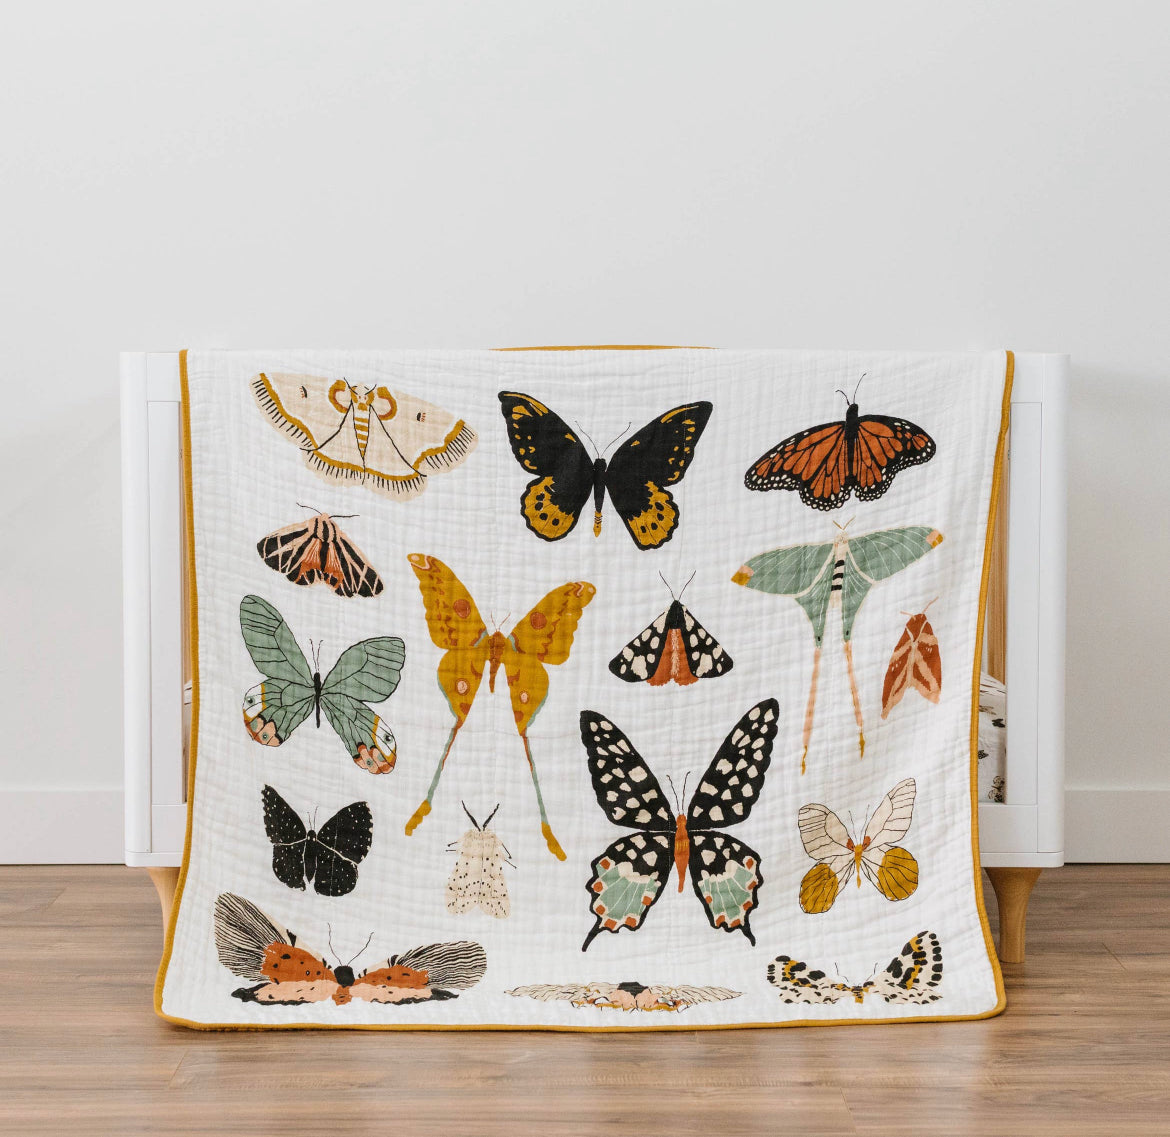 Butterfly collector quilt 47x47